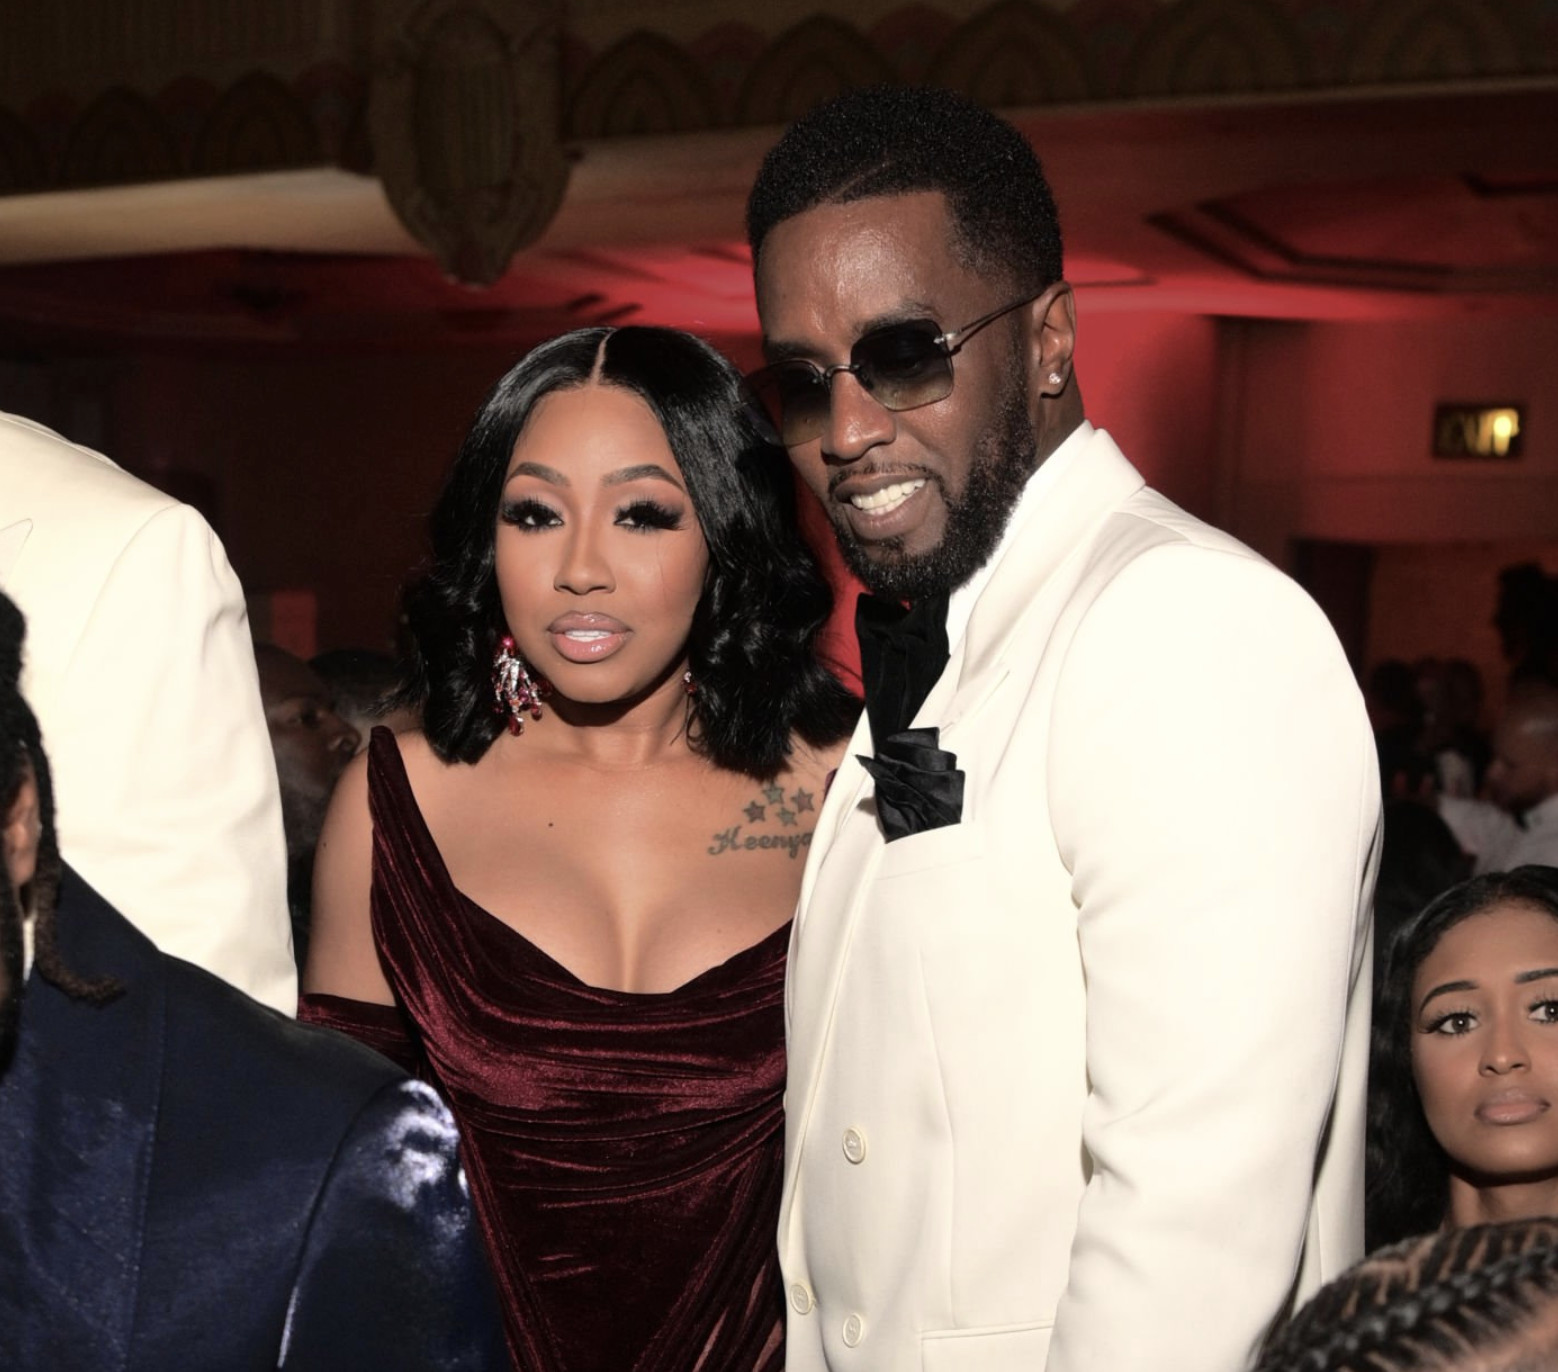 Diddy & Yung Miami Drink Shots To Their Exes While On Livestream